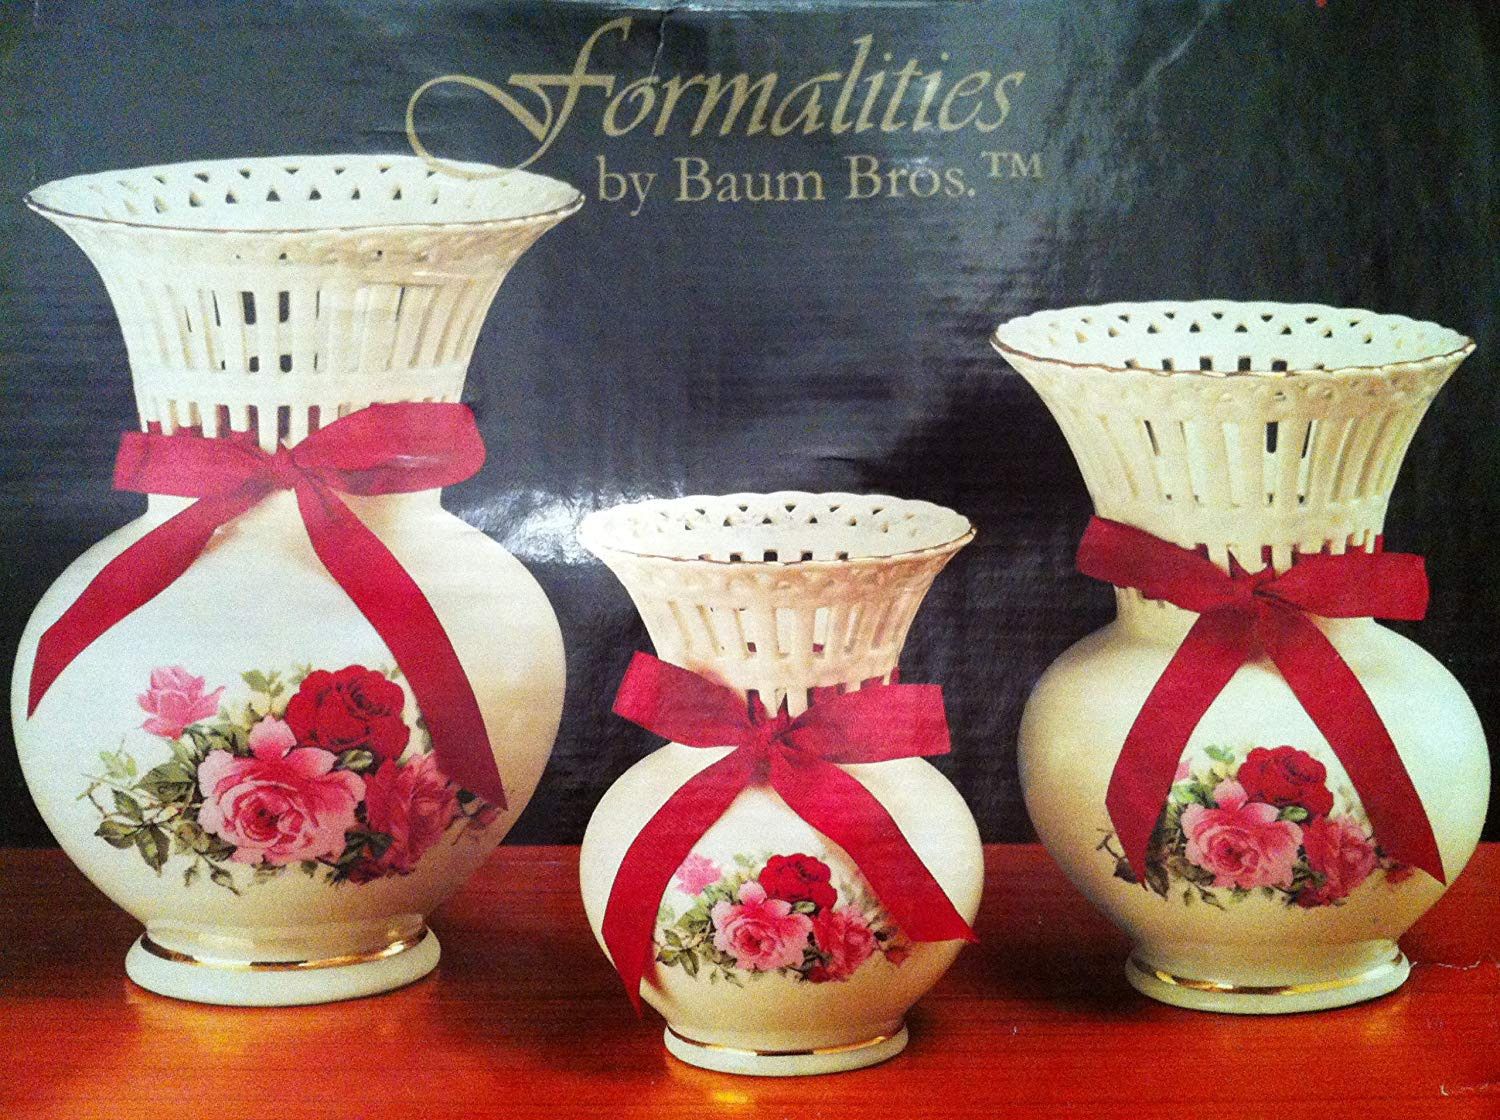 28 Perfect Waterford Giftology Lismore Sugar Bud Vase 2024 free download waterford giftology lismore sugar bud vase of amazon com formalities by baum bros latticework vases victorian with regard to amazon com formalities by baum bros latticework vases victorian r